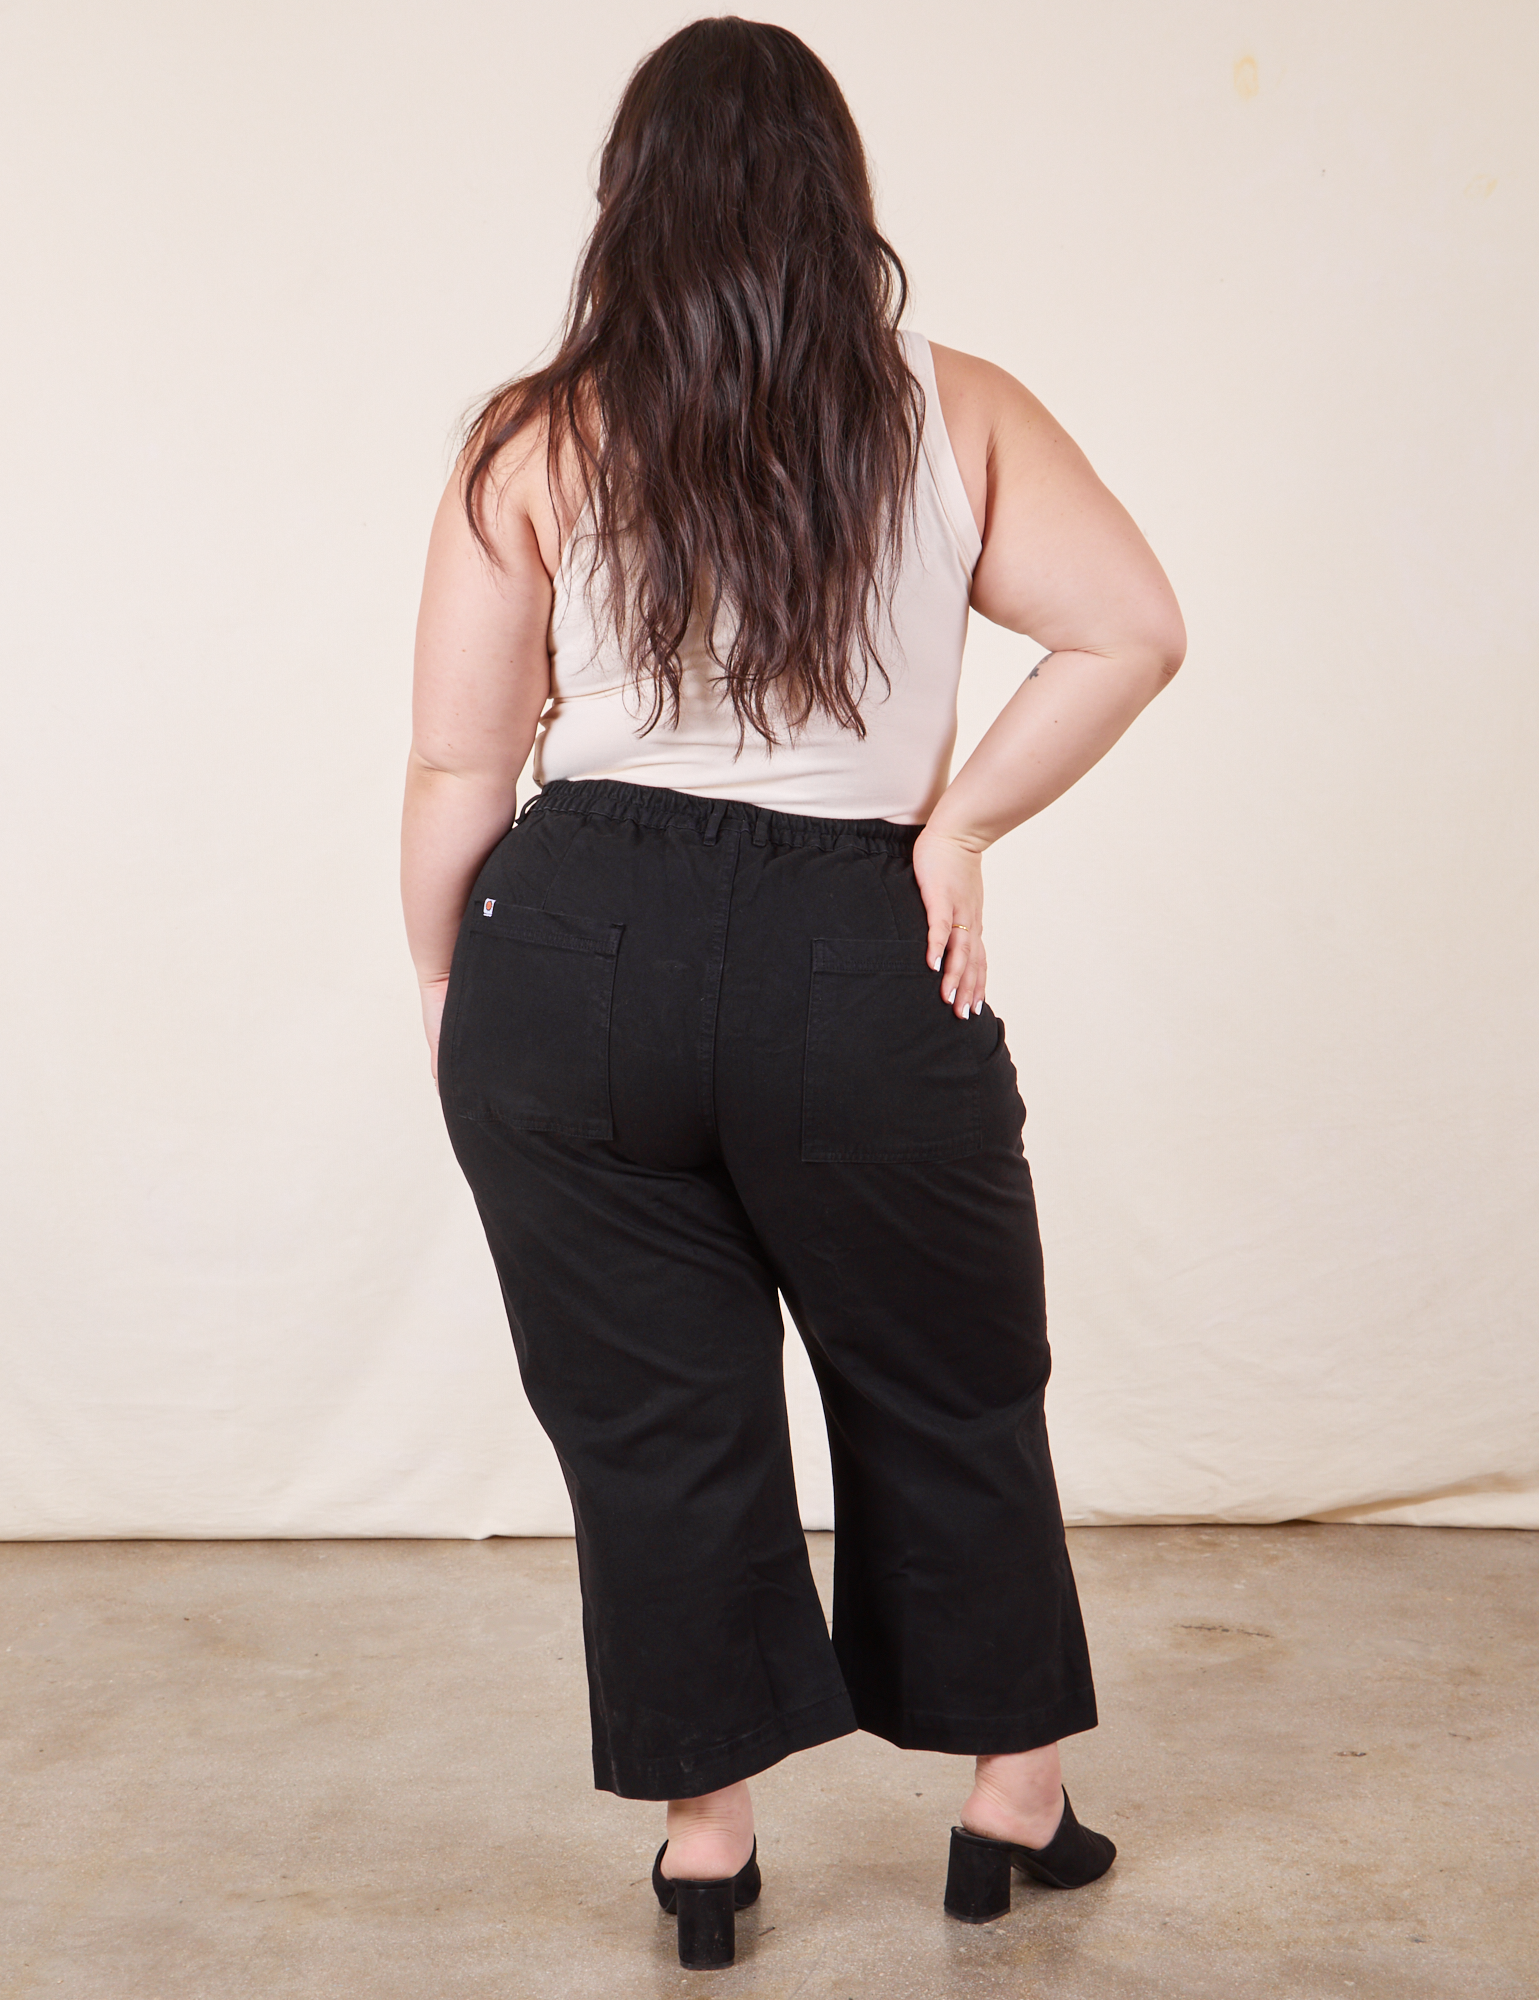 Western Pants in Basic Black back view on Ashley wearing vintage off-white Tank Top